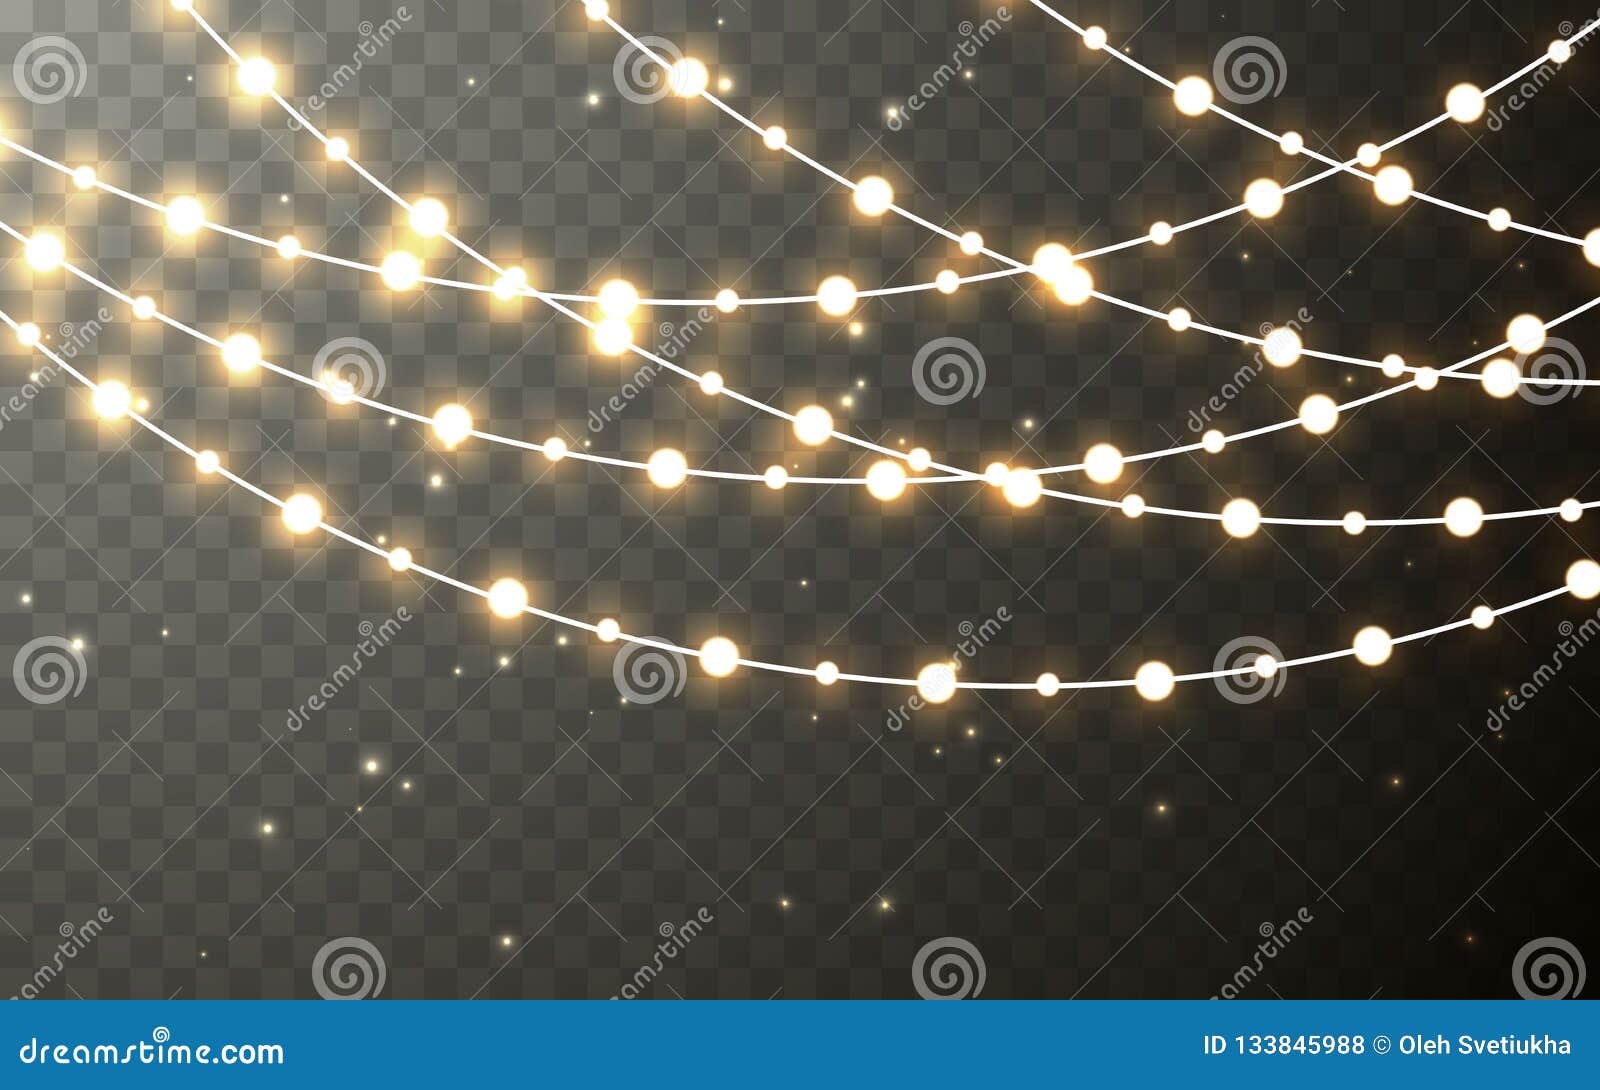 xmas color garland, festive decorations. glowing christmas lights transparent effect decoration on dark background. 